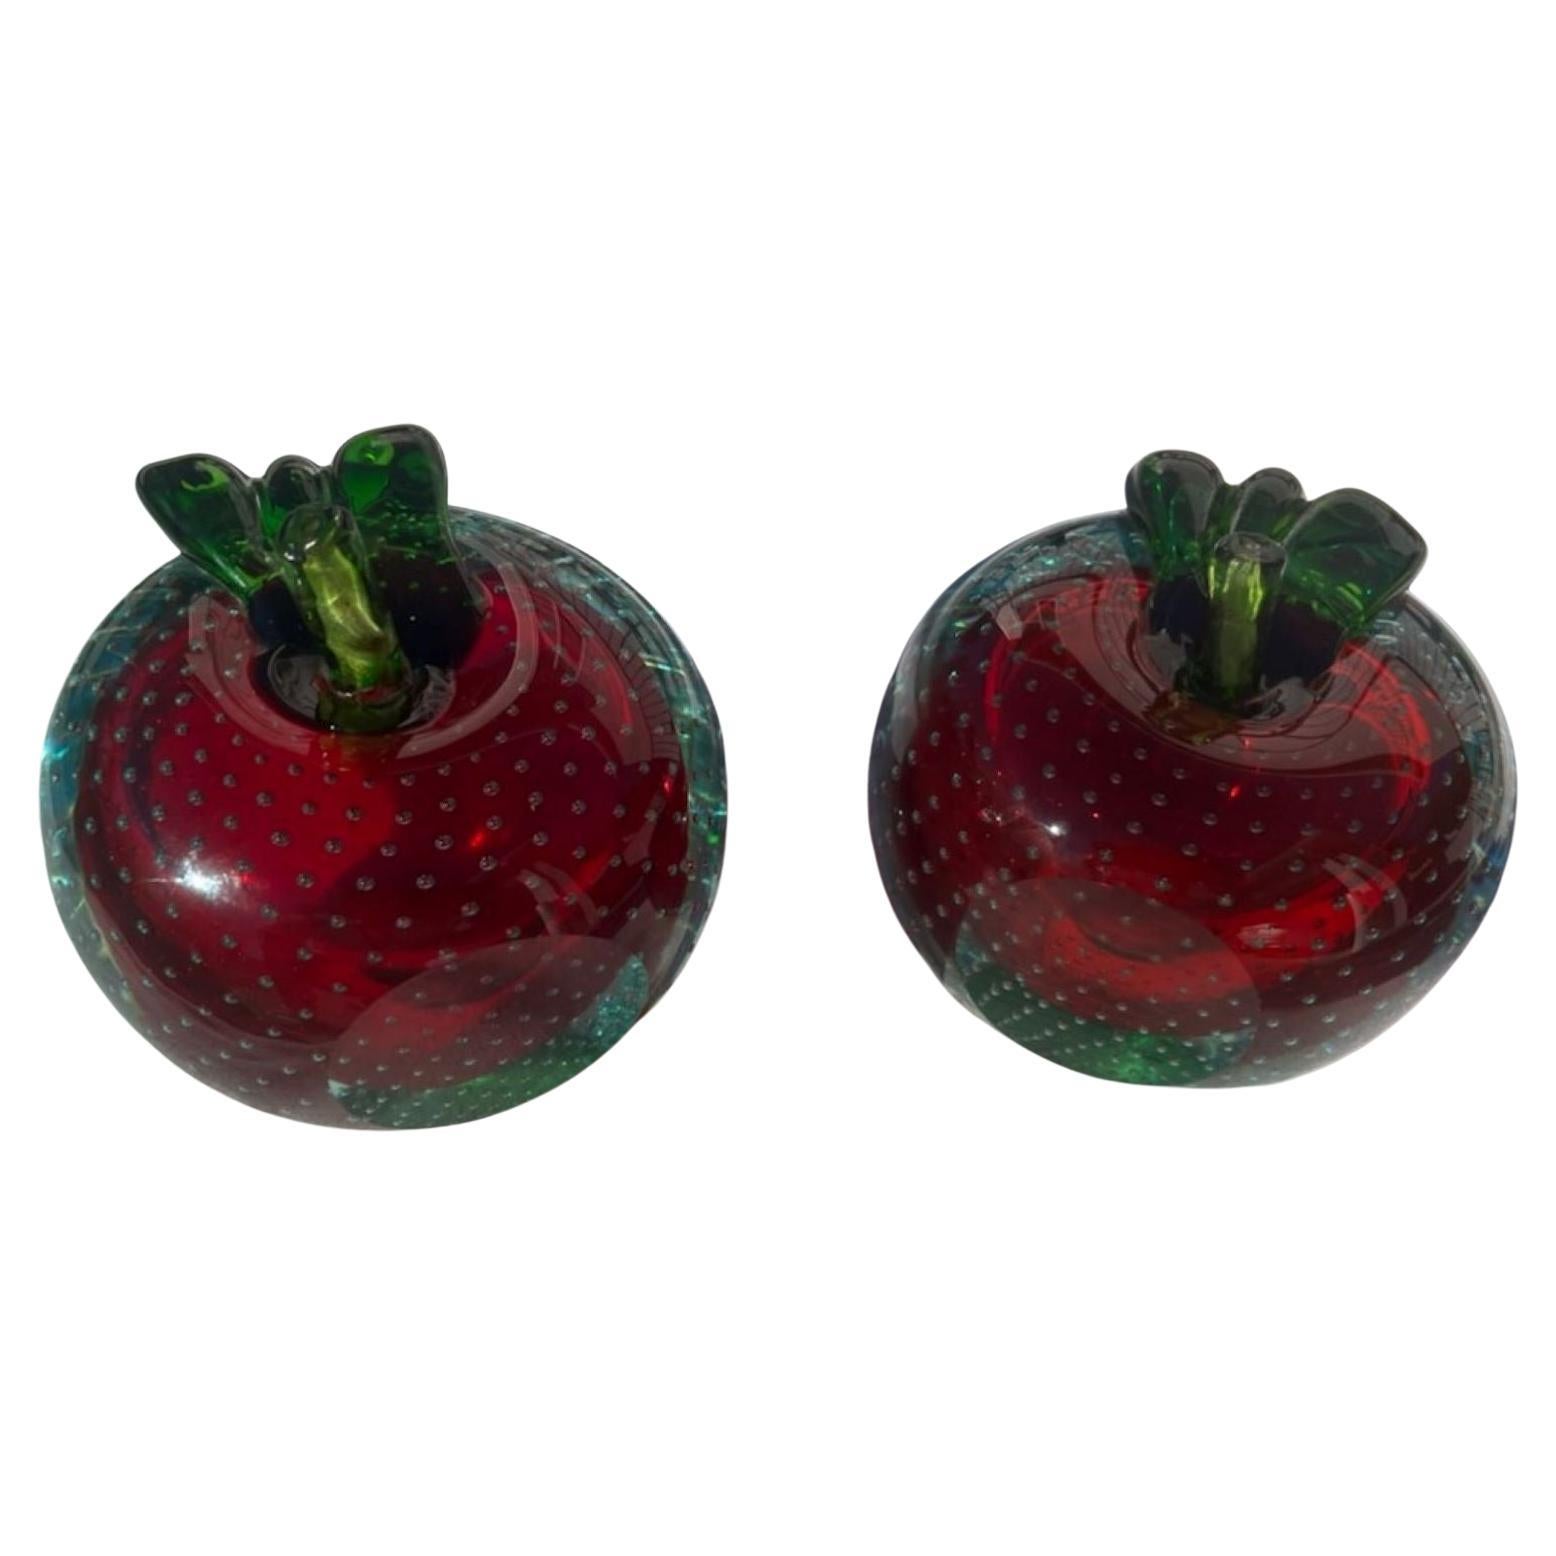 Pair of Italian Art Glass apples. Wonderful deep red transparent color with intentional bubbles on the surface of the apples. The green stem is a seperatly added piece completing each apple. 